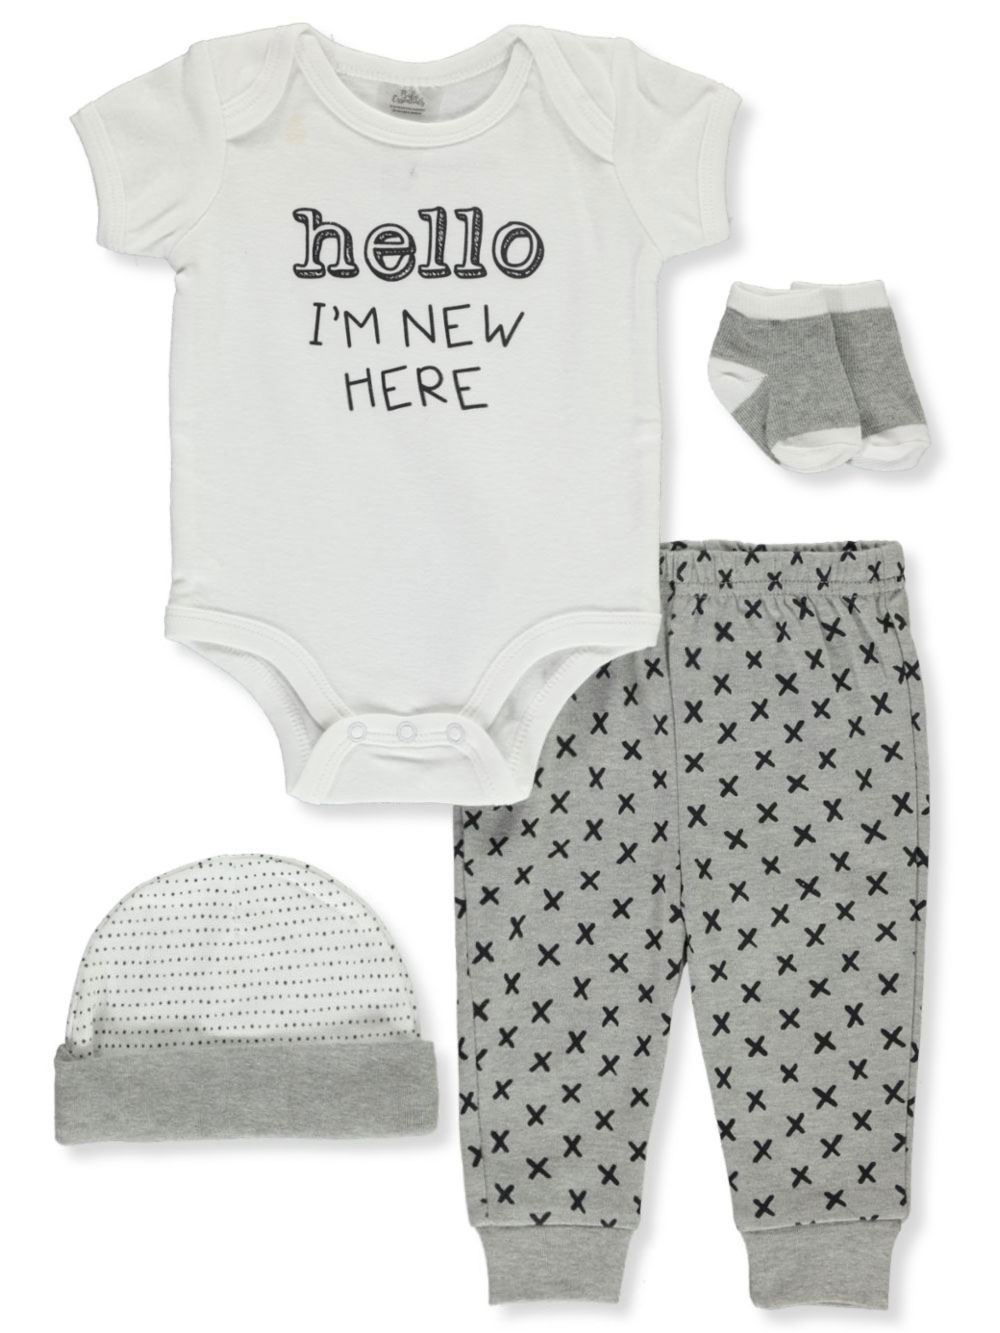 Boys Gray and Multicolor Sets